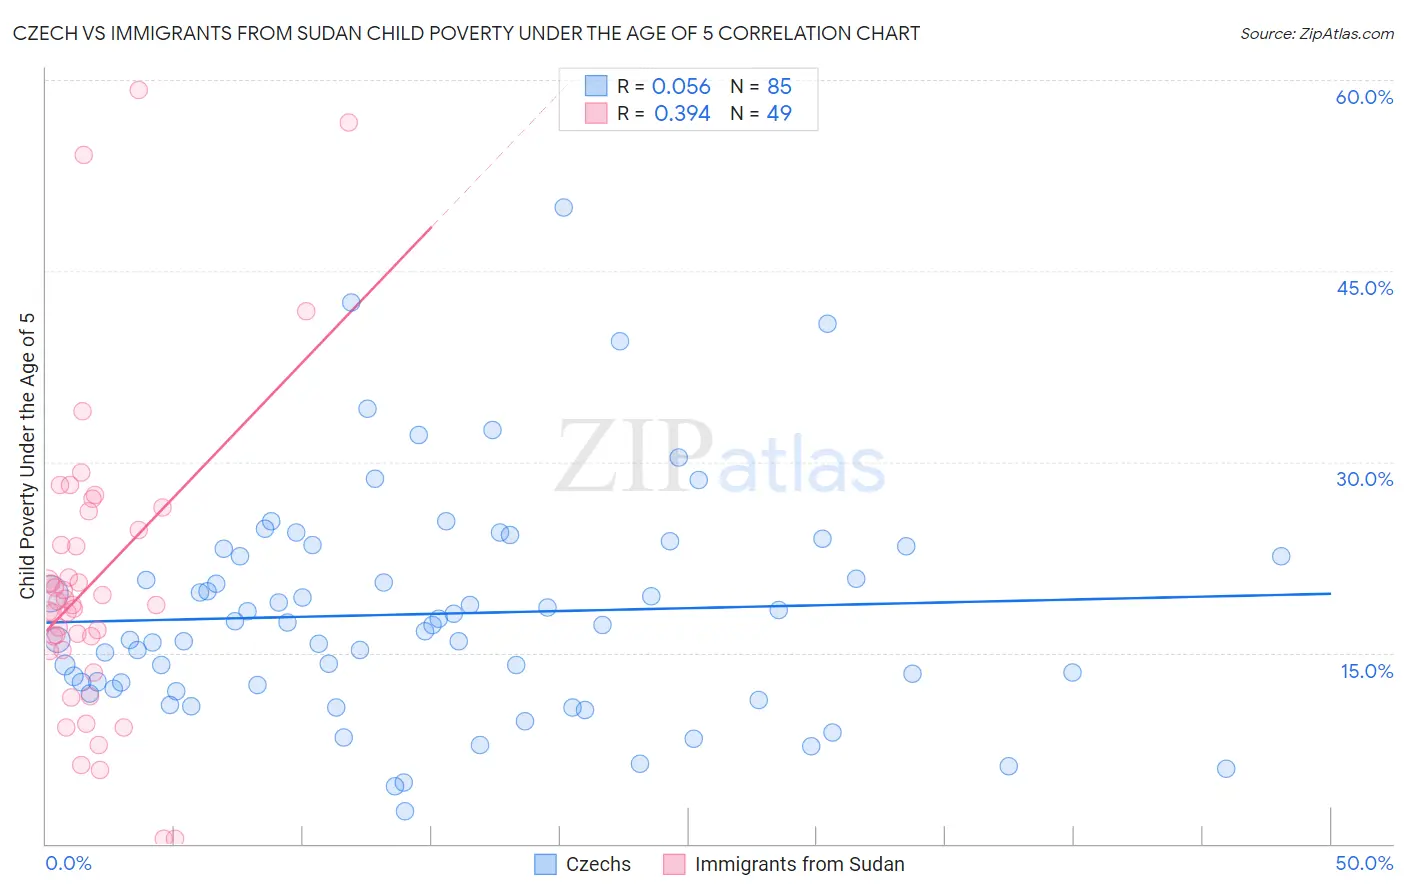 Czech vs Immigrants from Sudan Child Poverty Under the Age of 5